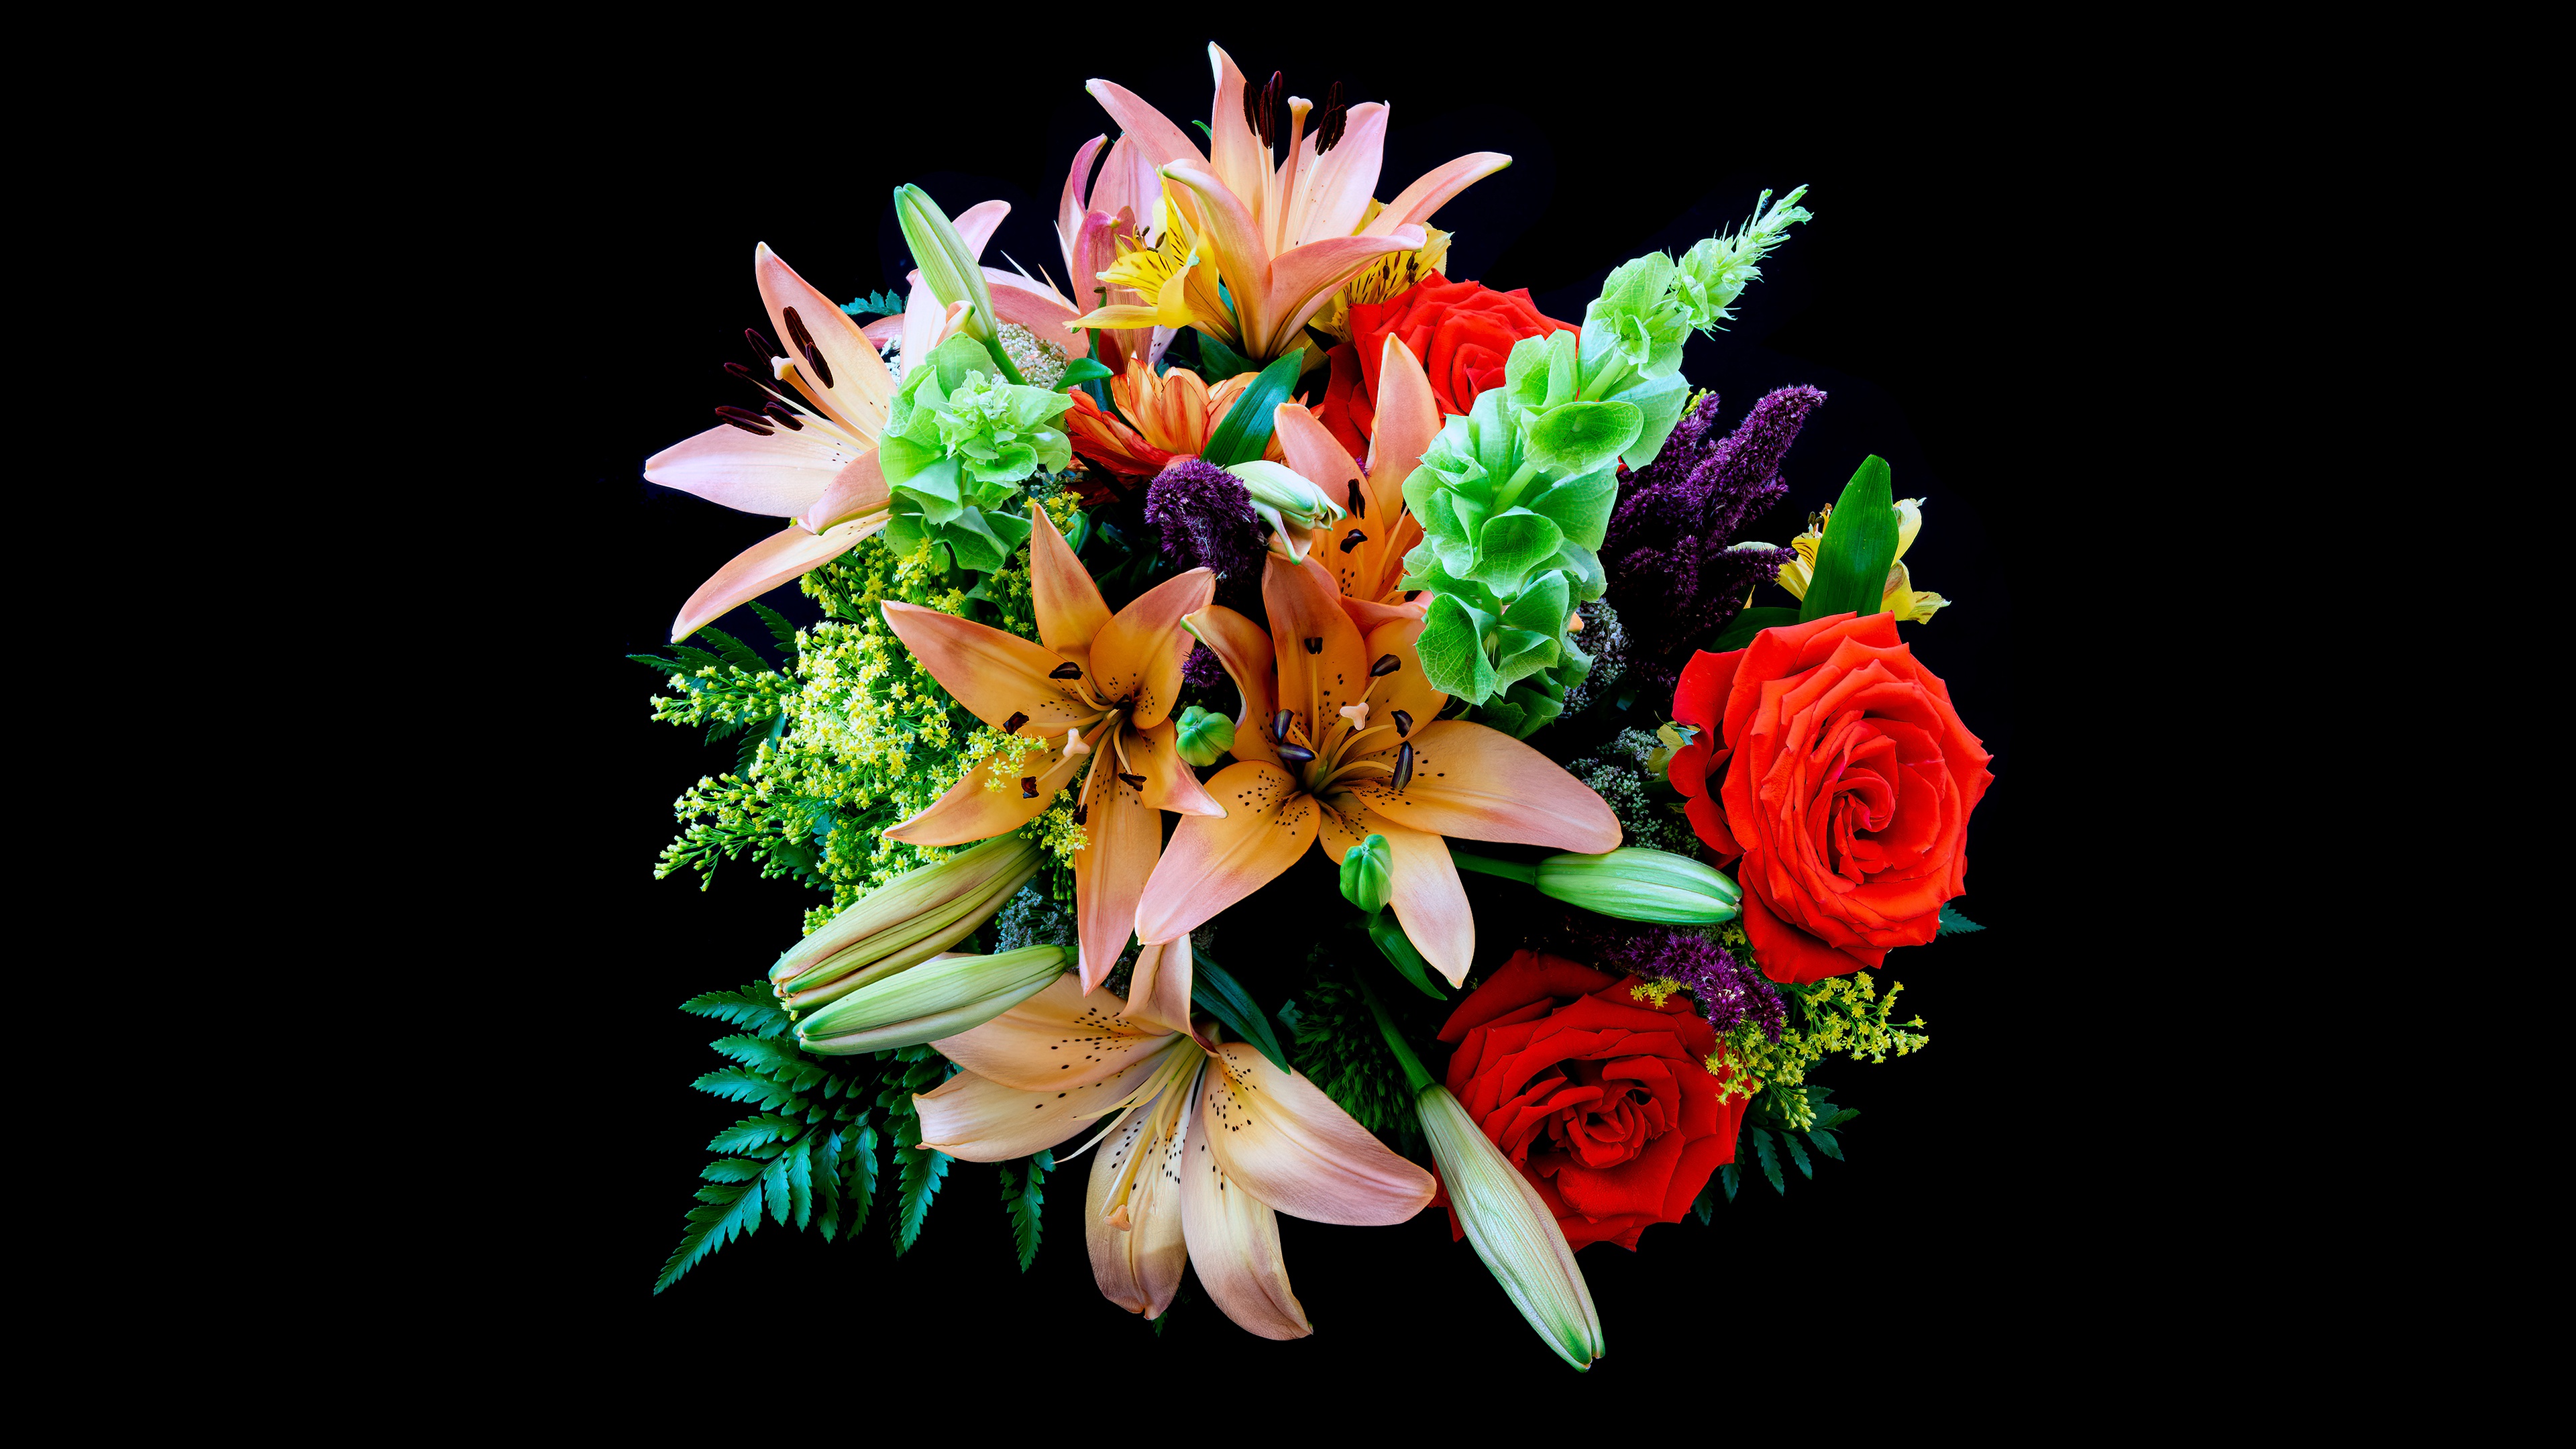 Free photo Bouquet of roses with lilies on black background